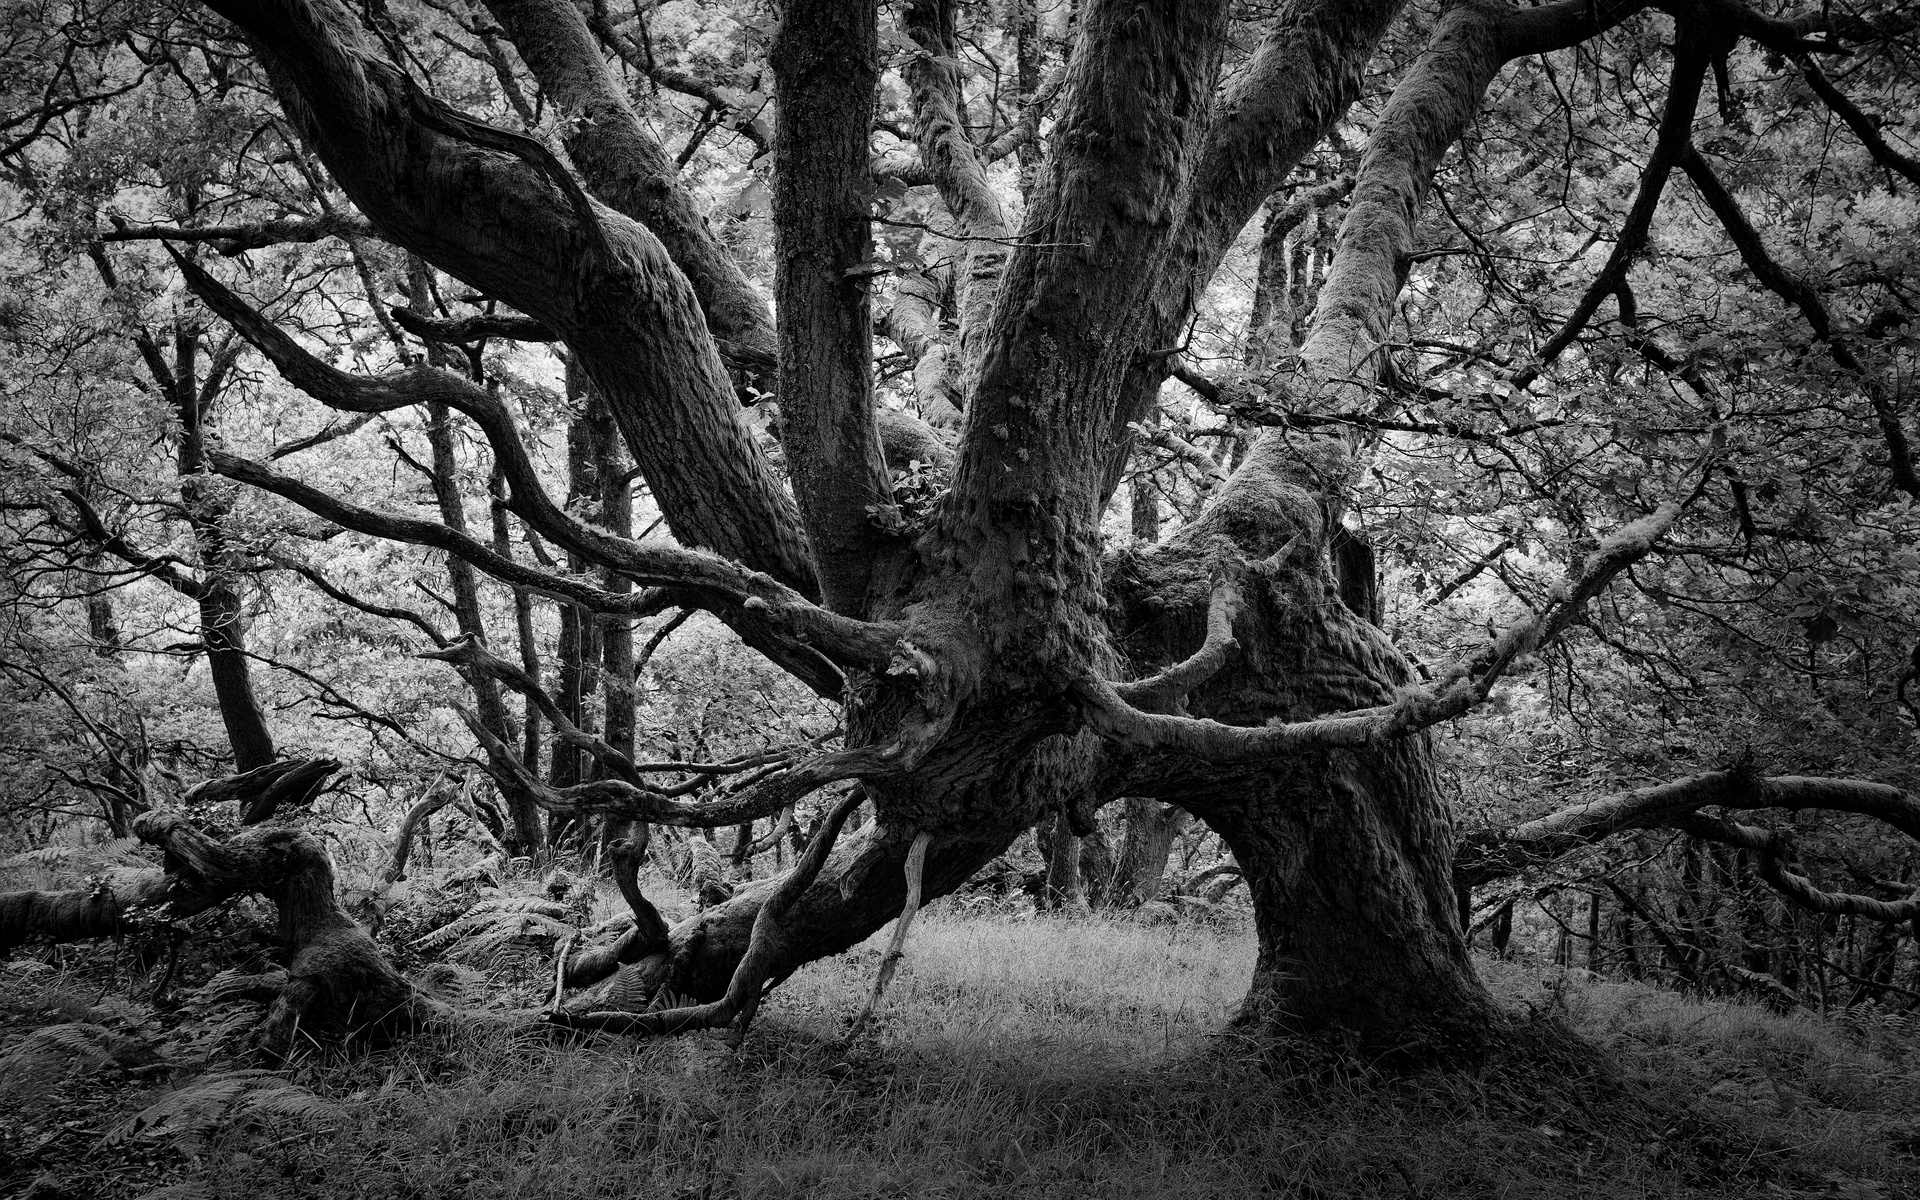 Dunning Glen 9: Characterful Trees 5